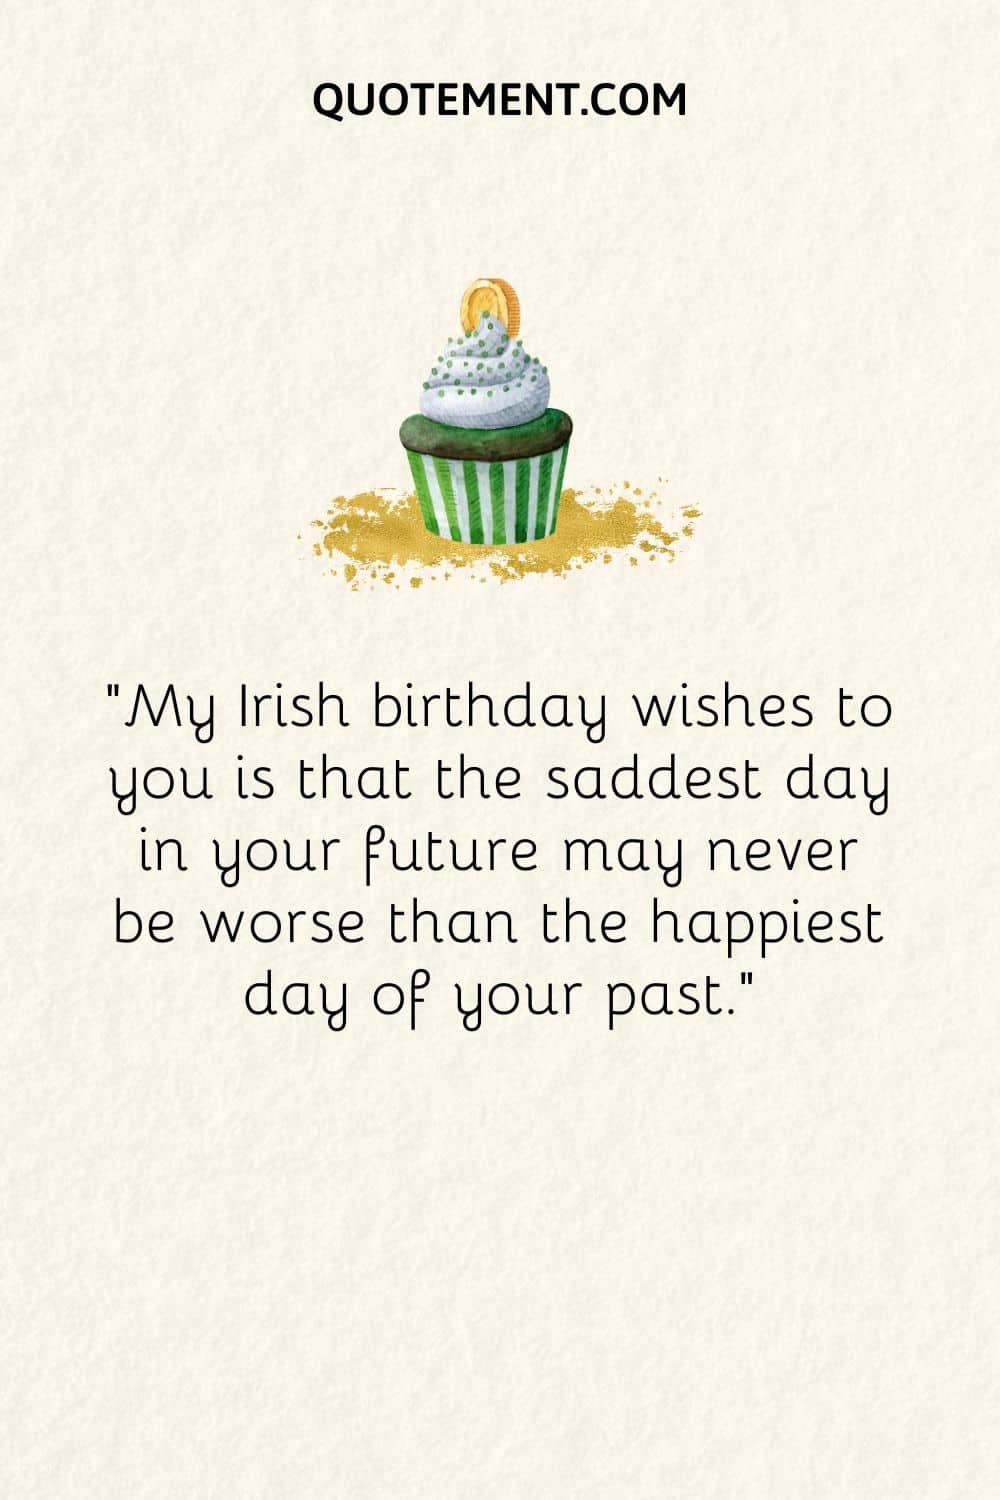 My Irish birthday wishes to you is that the saddest day in your future may never be worse than the happiest day of your past